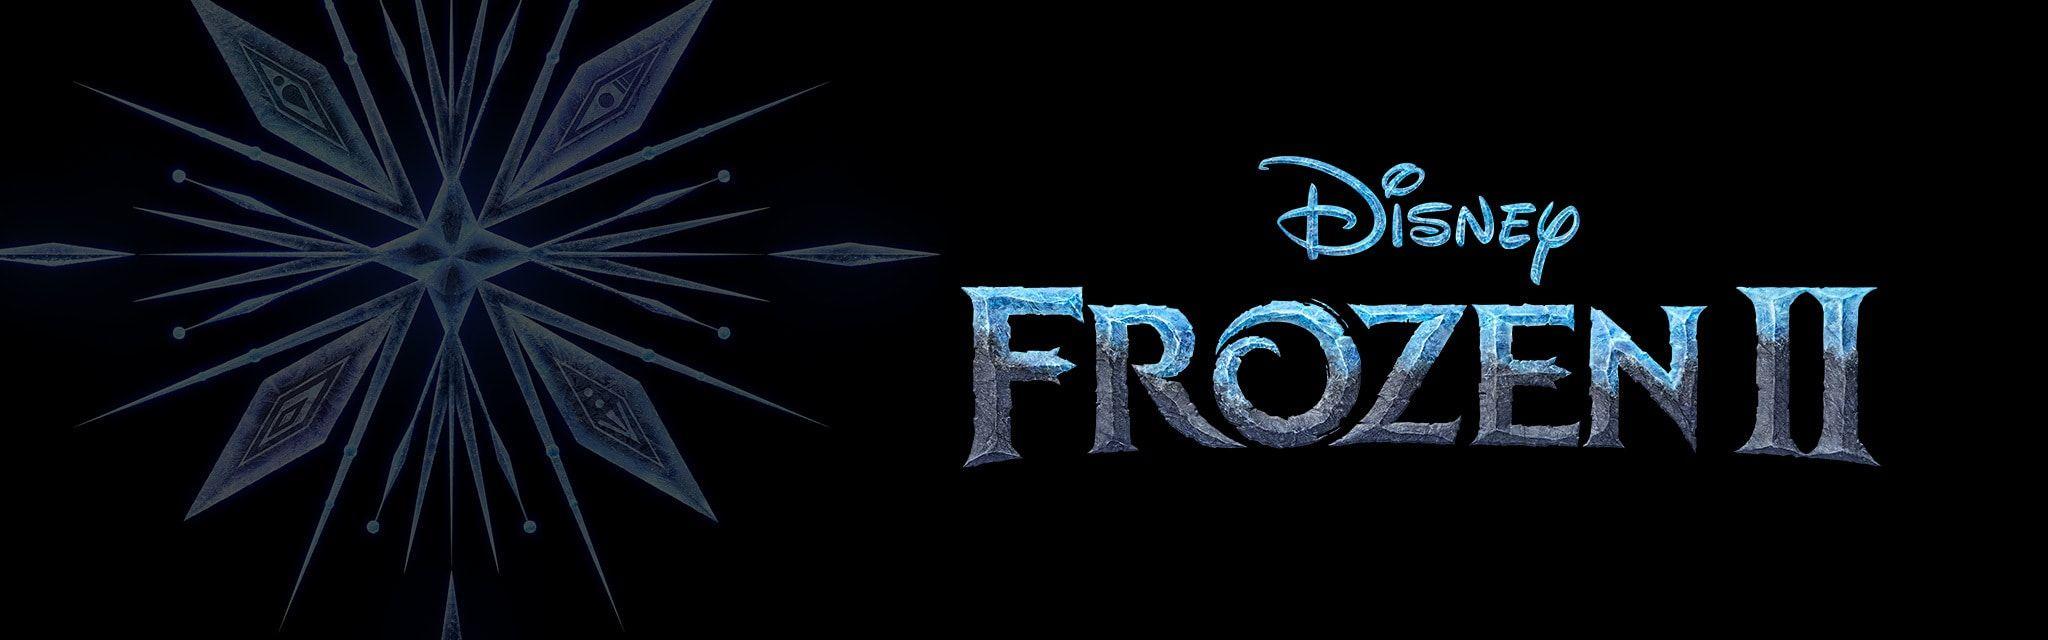 Coming Soon to Theaters From Disney & Pixar Logo - Disney Movies | Official Site